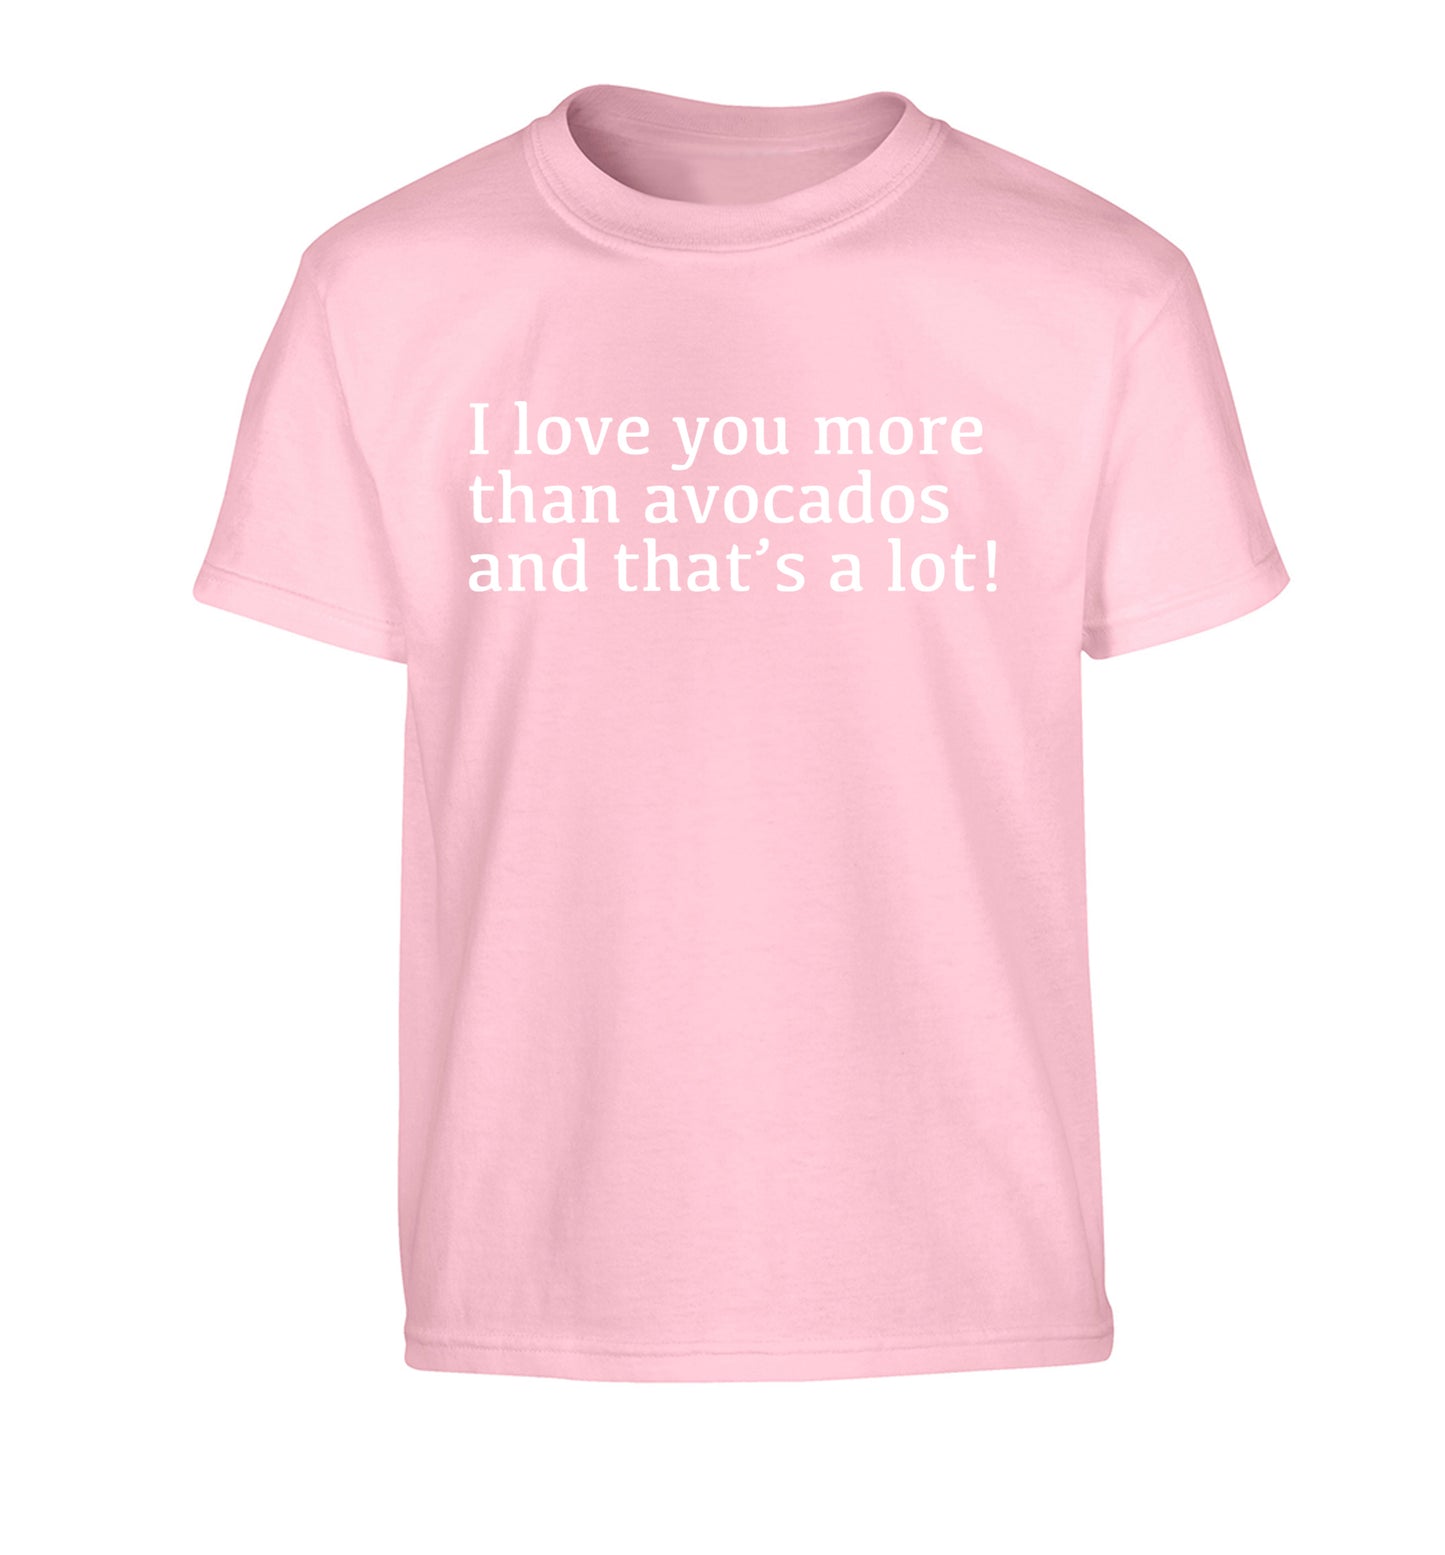 I love you more than avocados and that's a lot Children's light pink Tshirt 12-14 Years